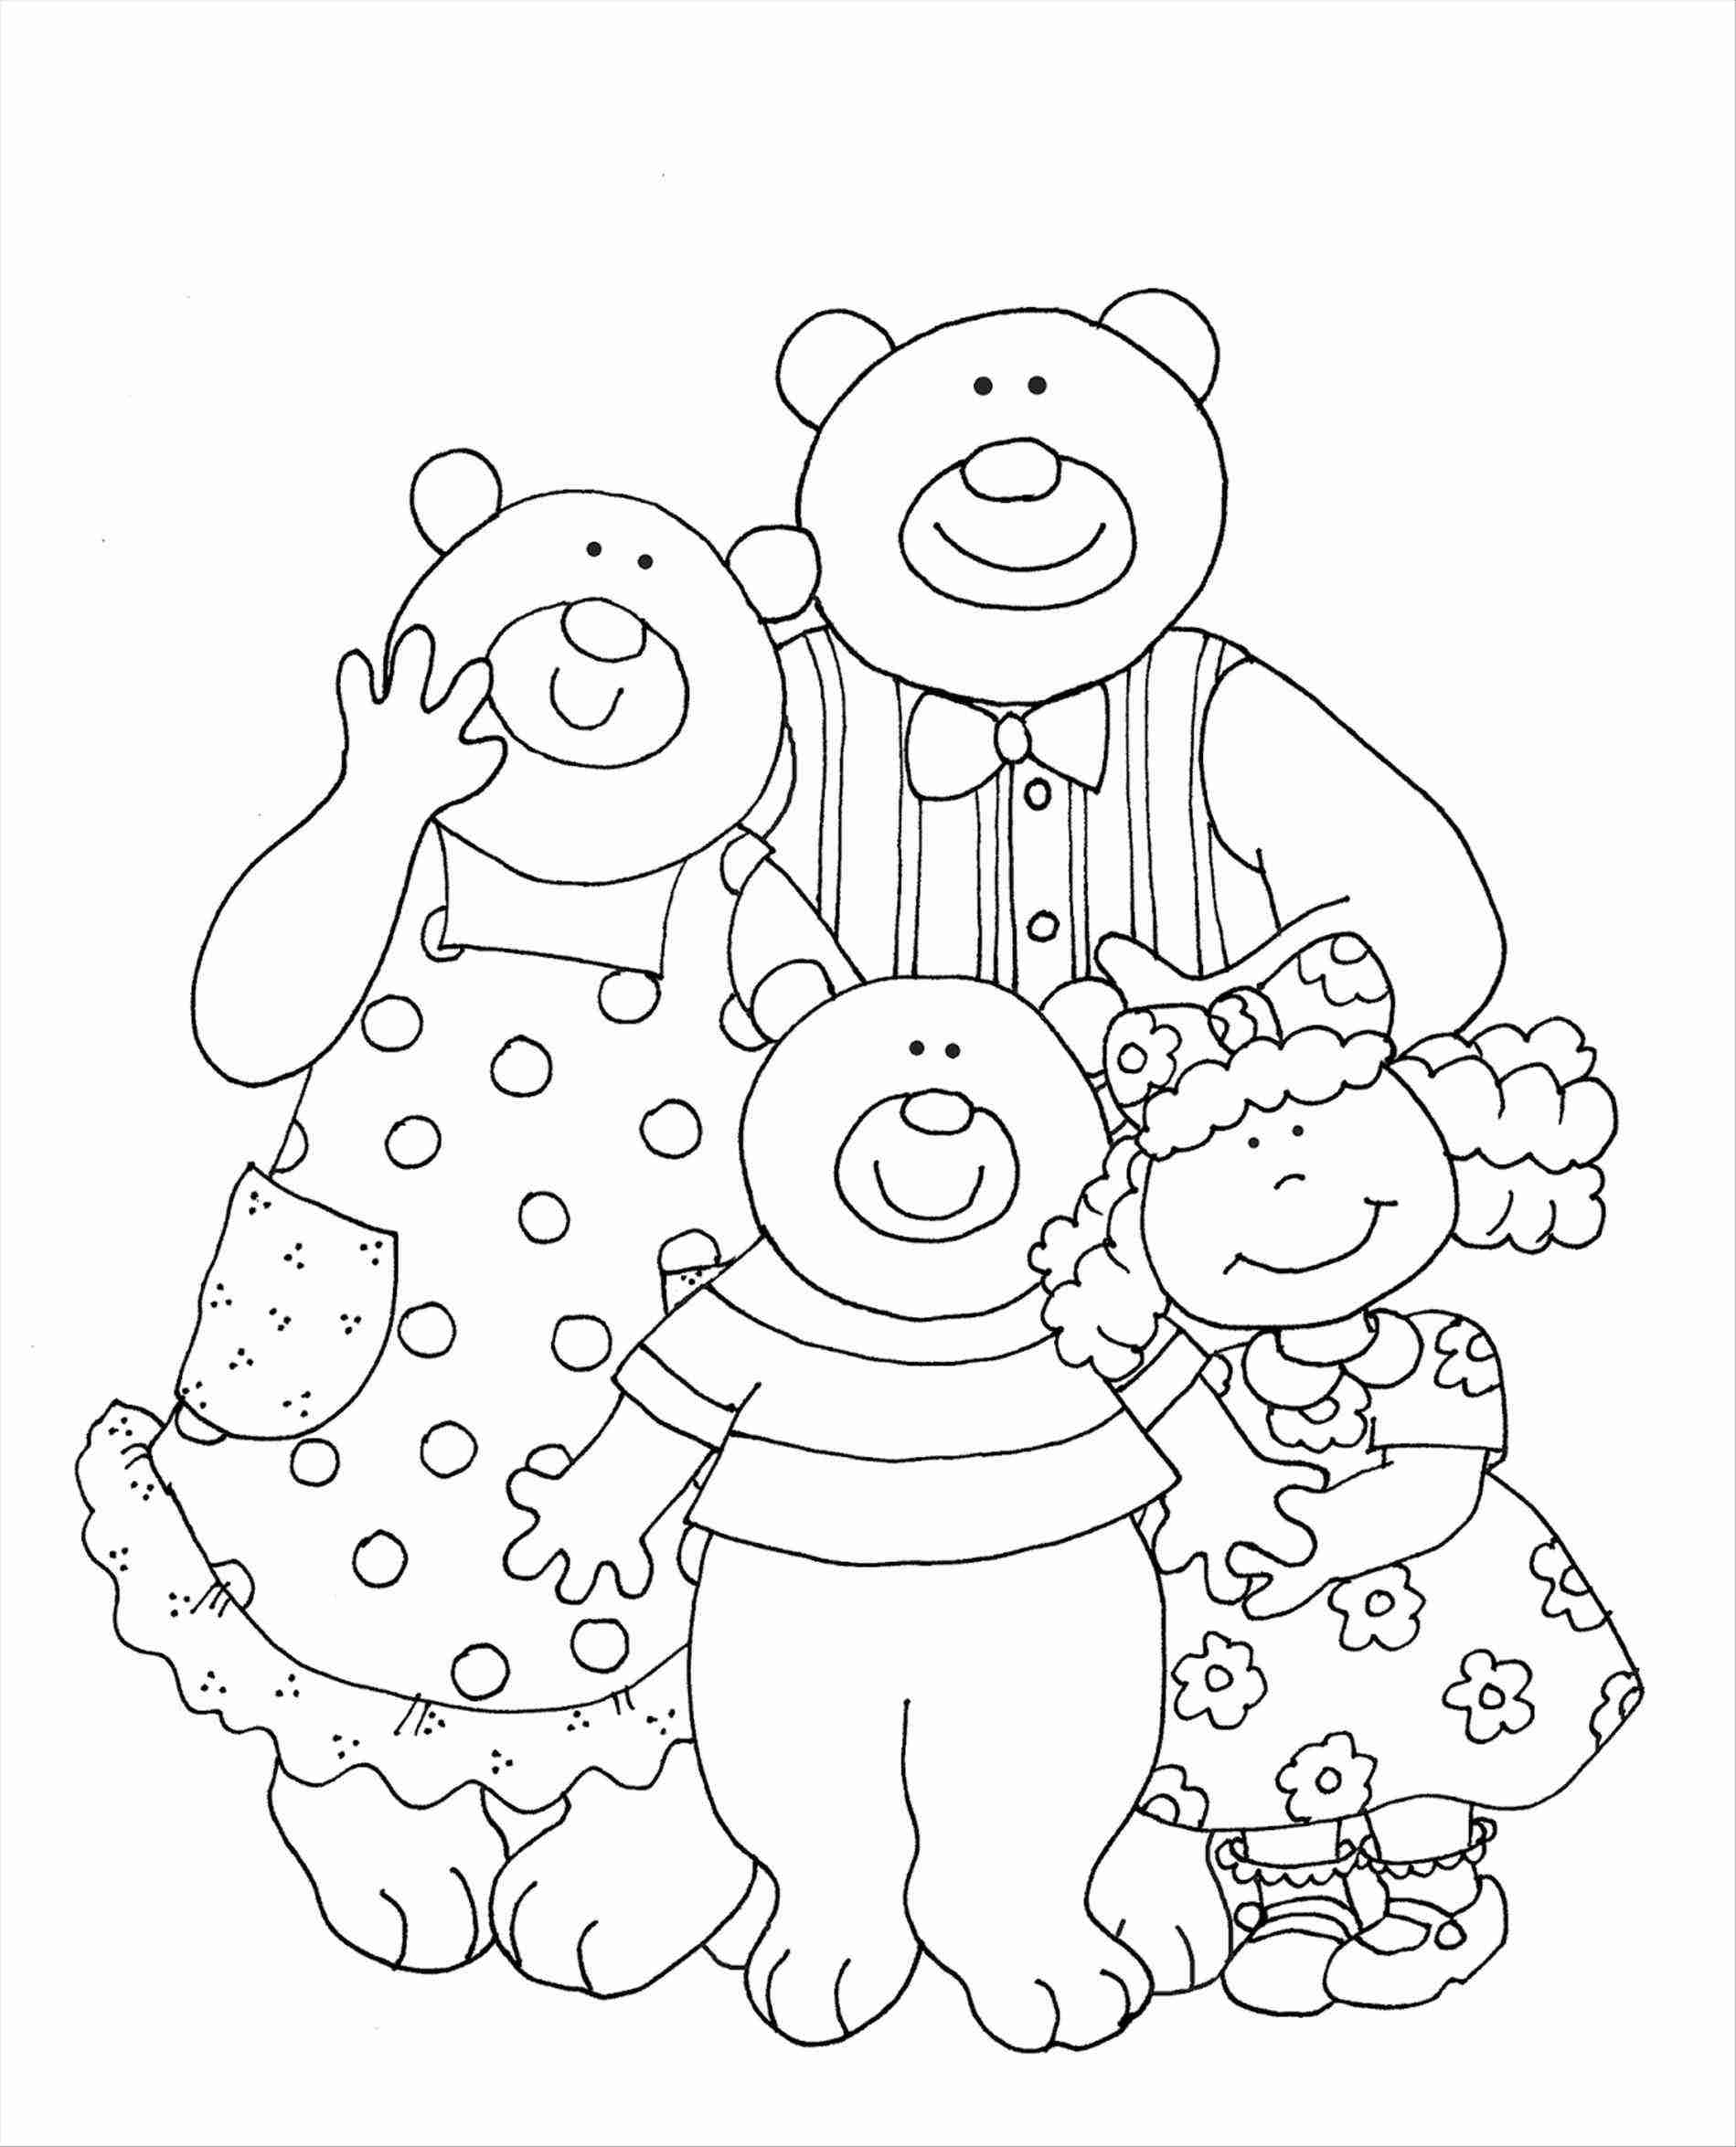 Goldilocks And The Three Bears Printables You Can Glue Them With The ...